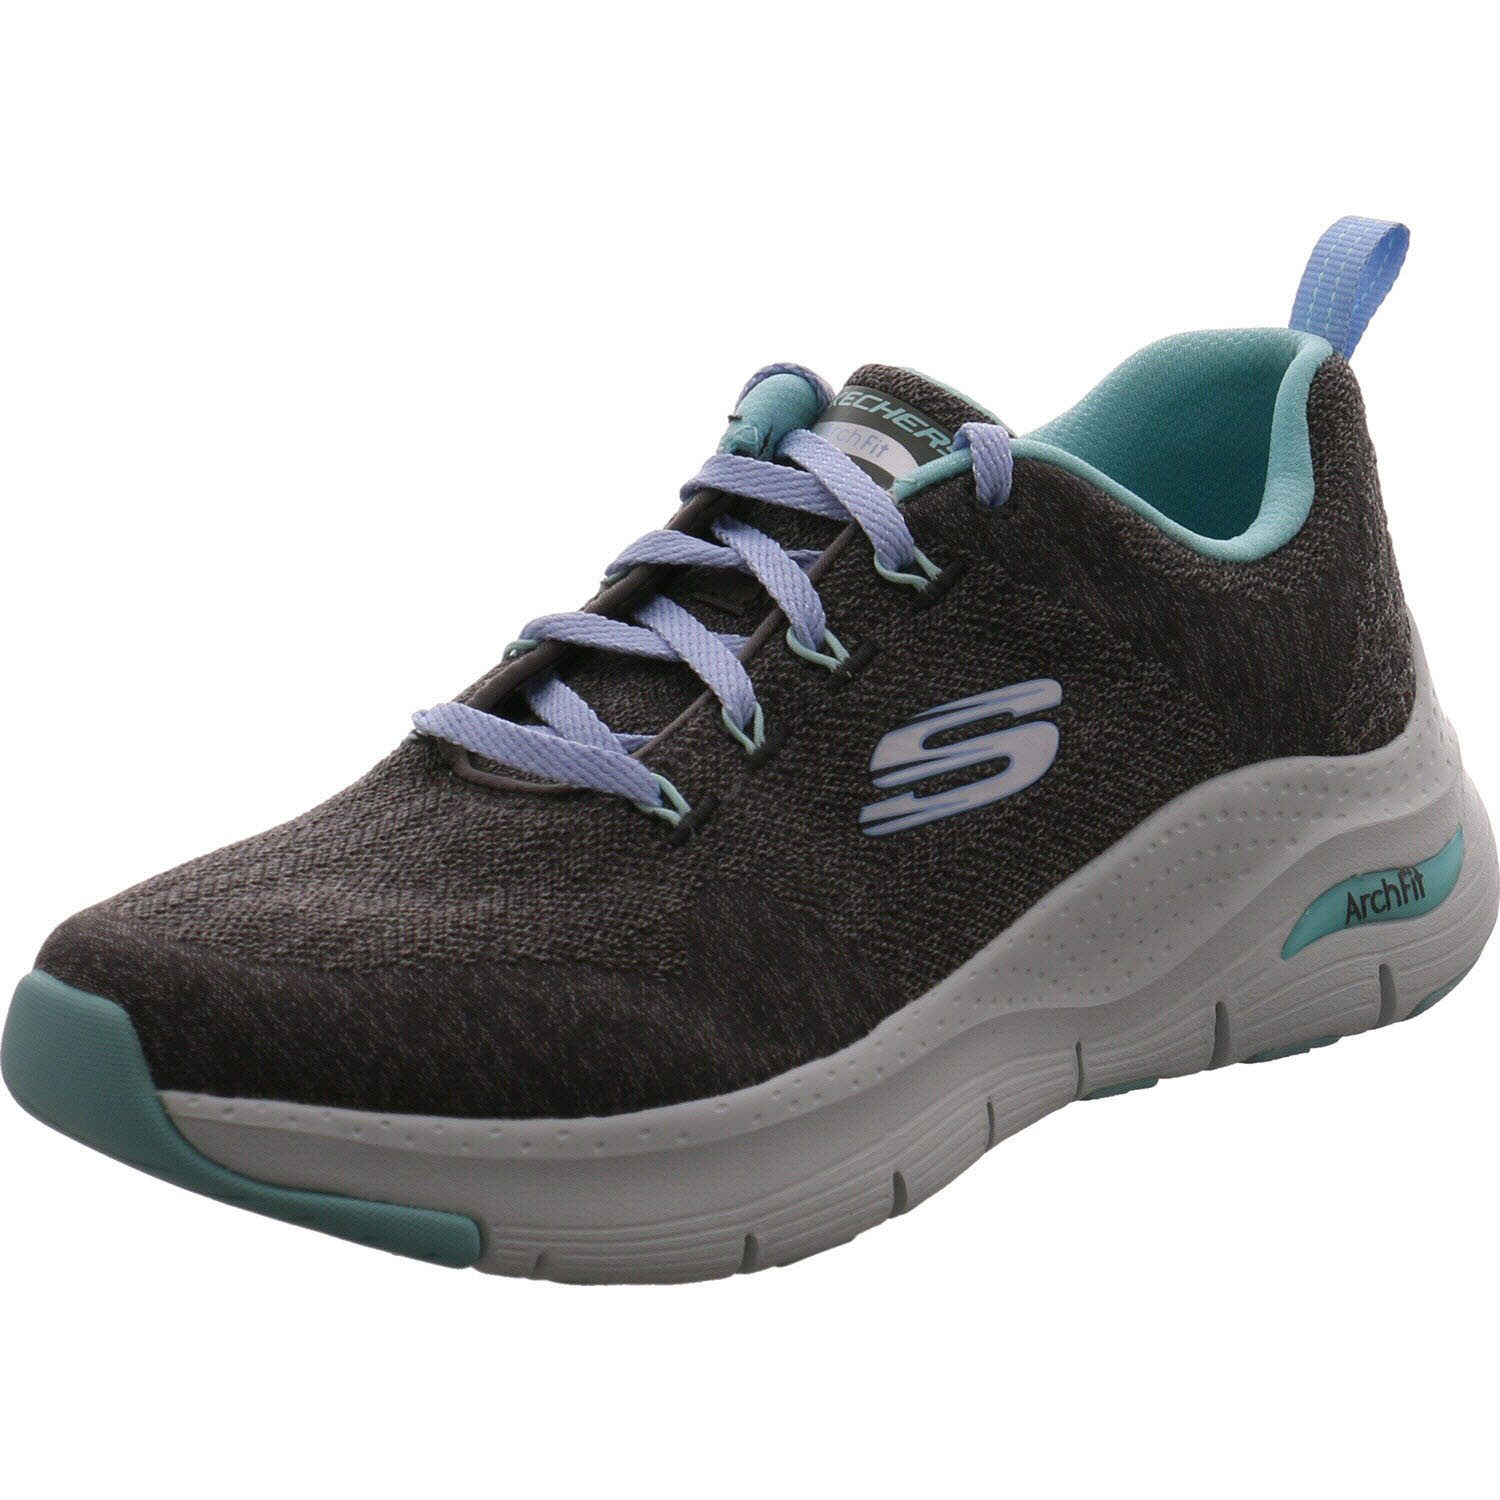 Skechers Sneaker low Arch fit comfy wave